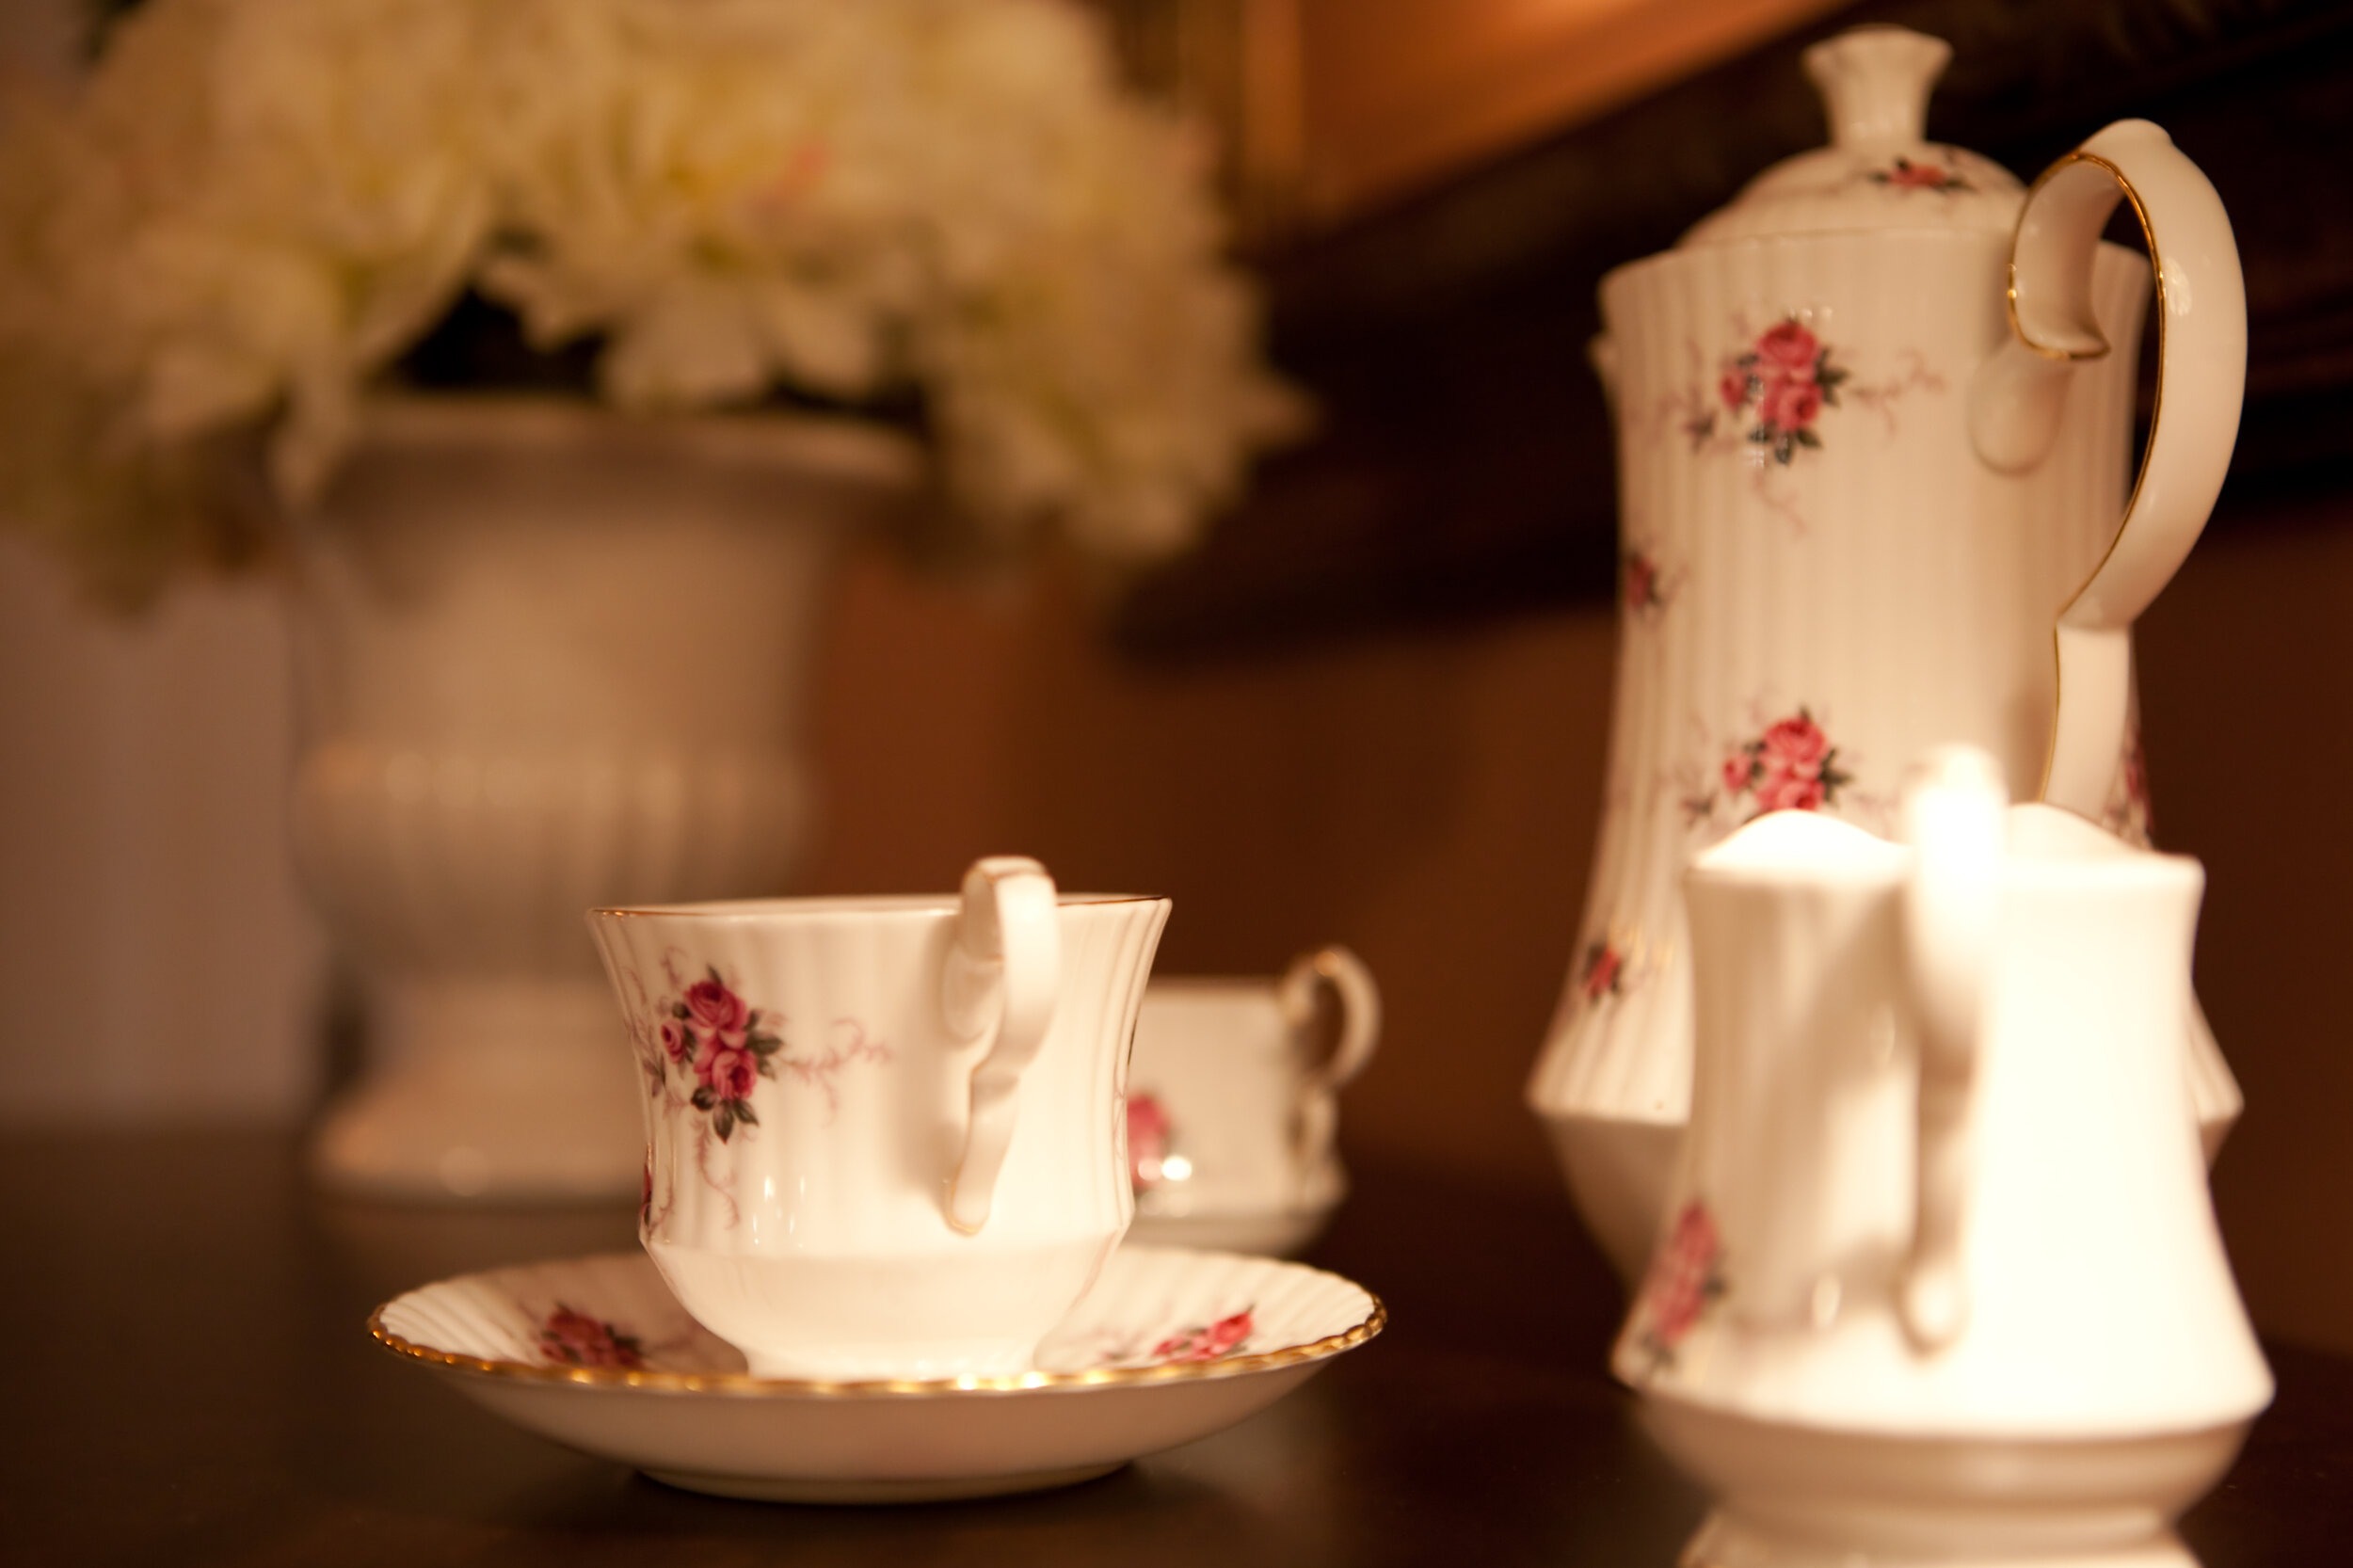 China tea pot, cups, and creamer with flowers in background